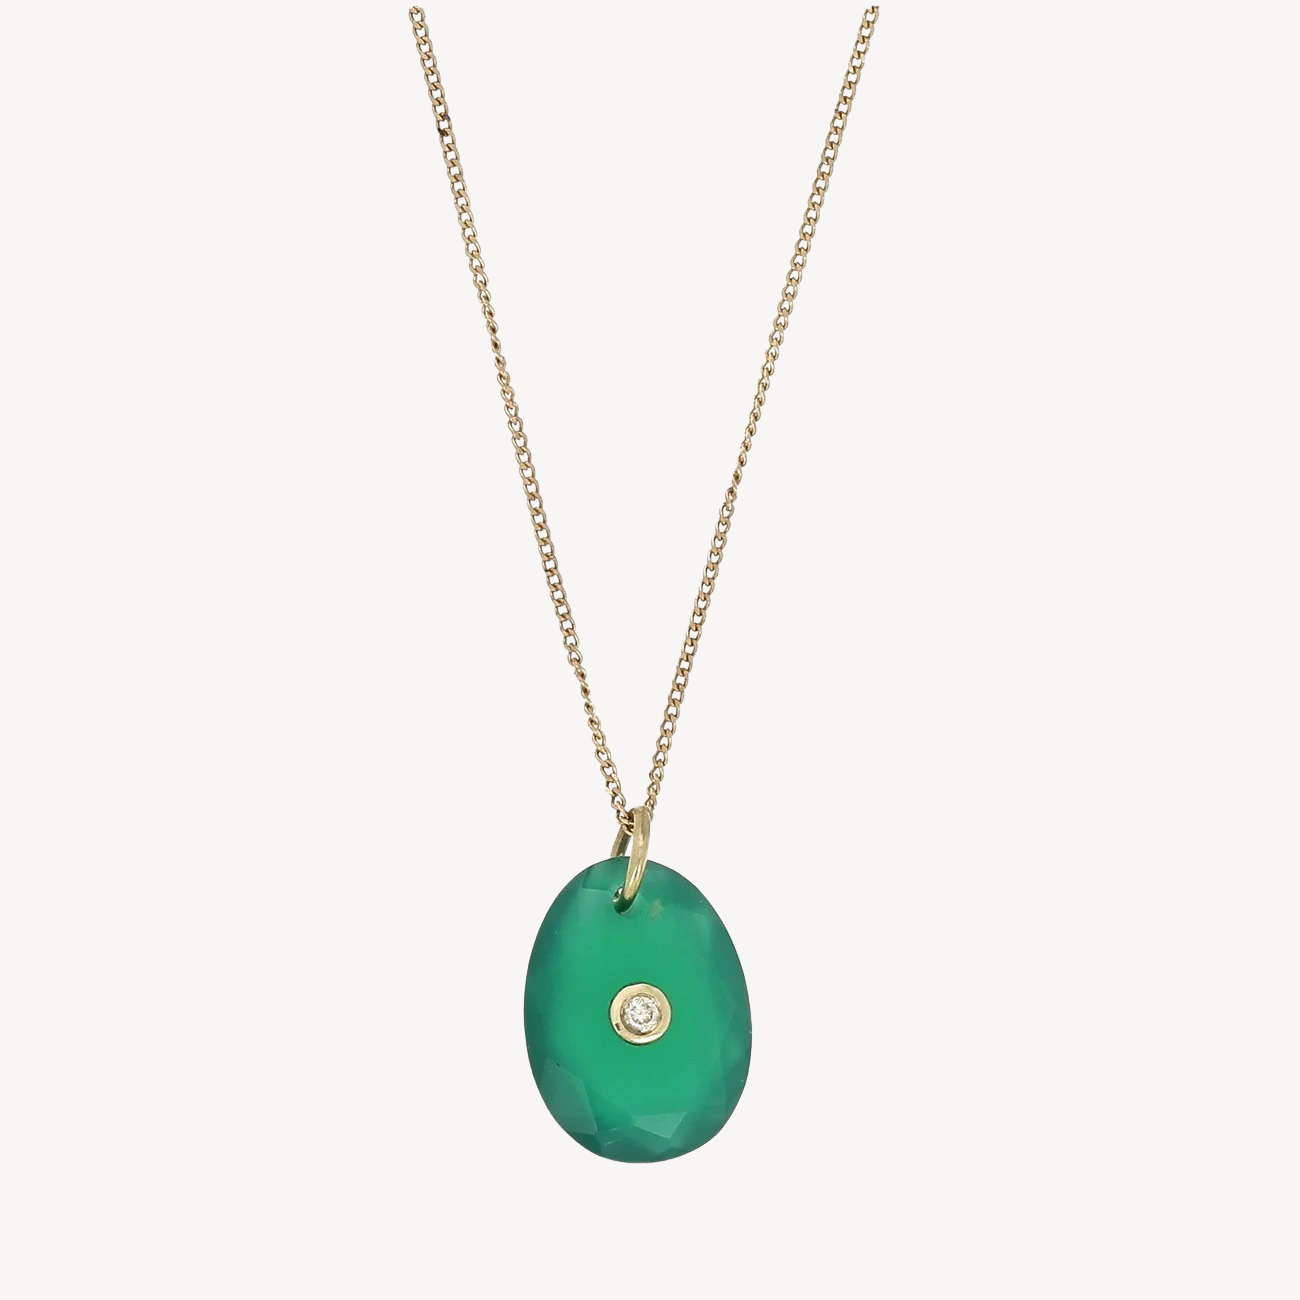 Orso Green Onyx Necklace n°1 